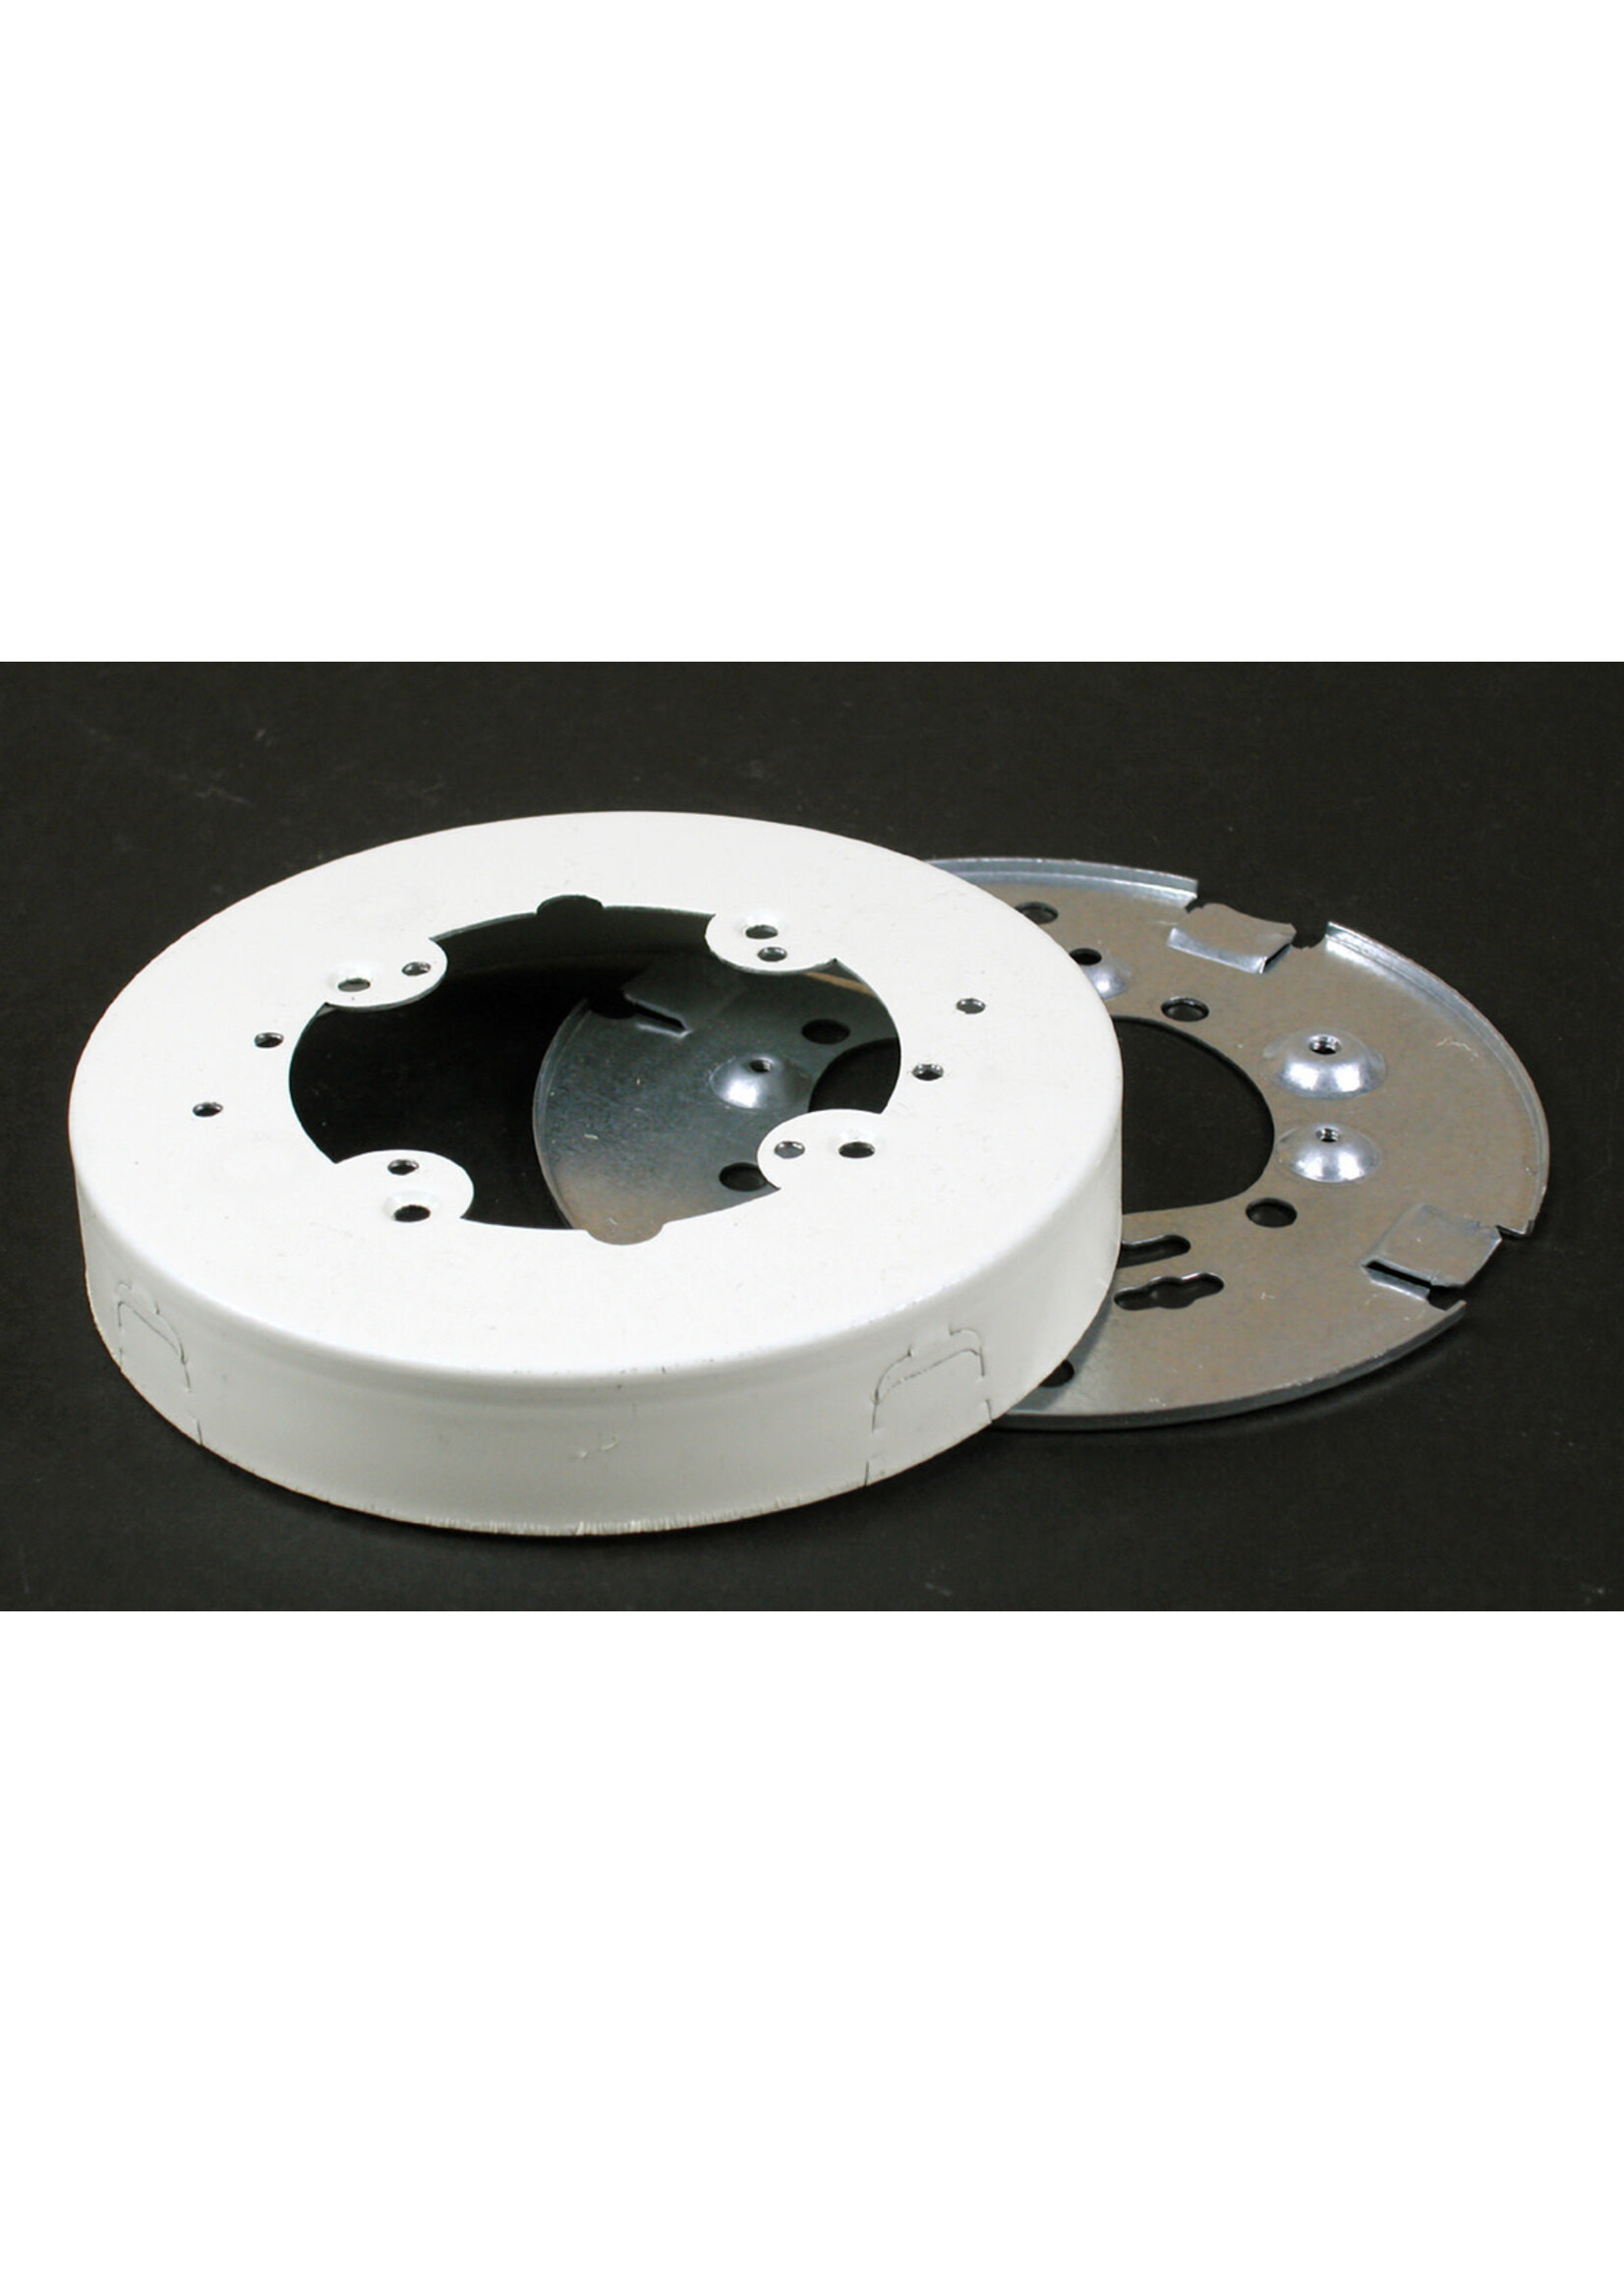 WIREMOLD 15-V5737  FIXTURE BOX  (Octagonal Ext. Ring) IVORY